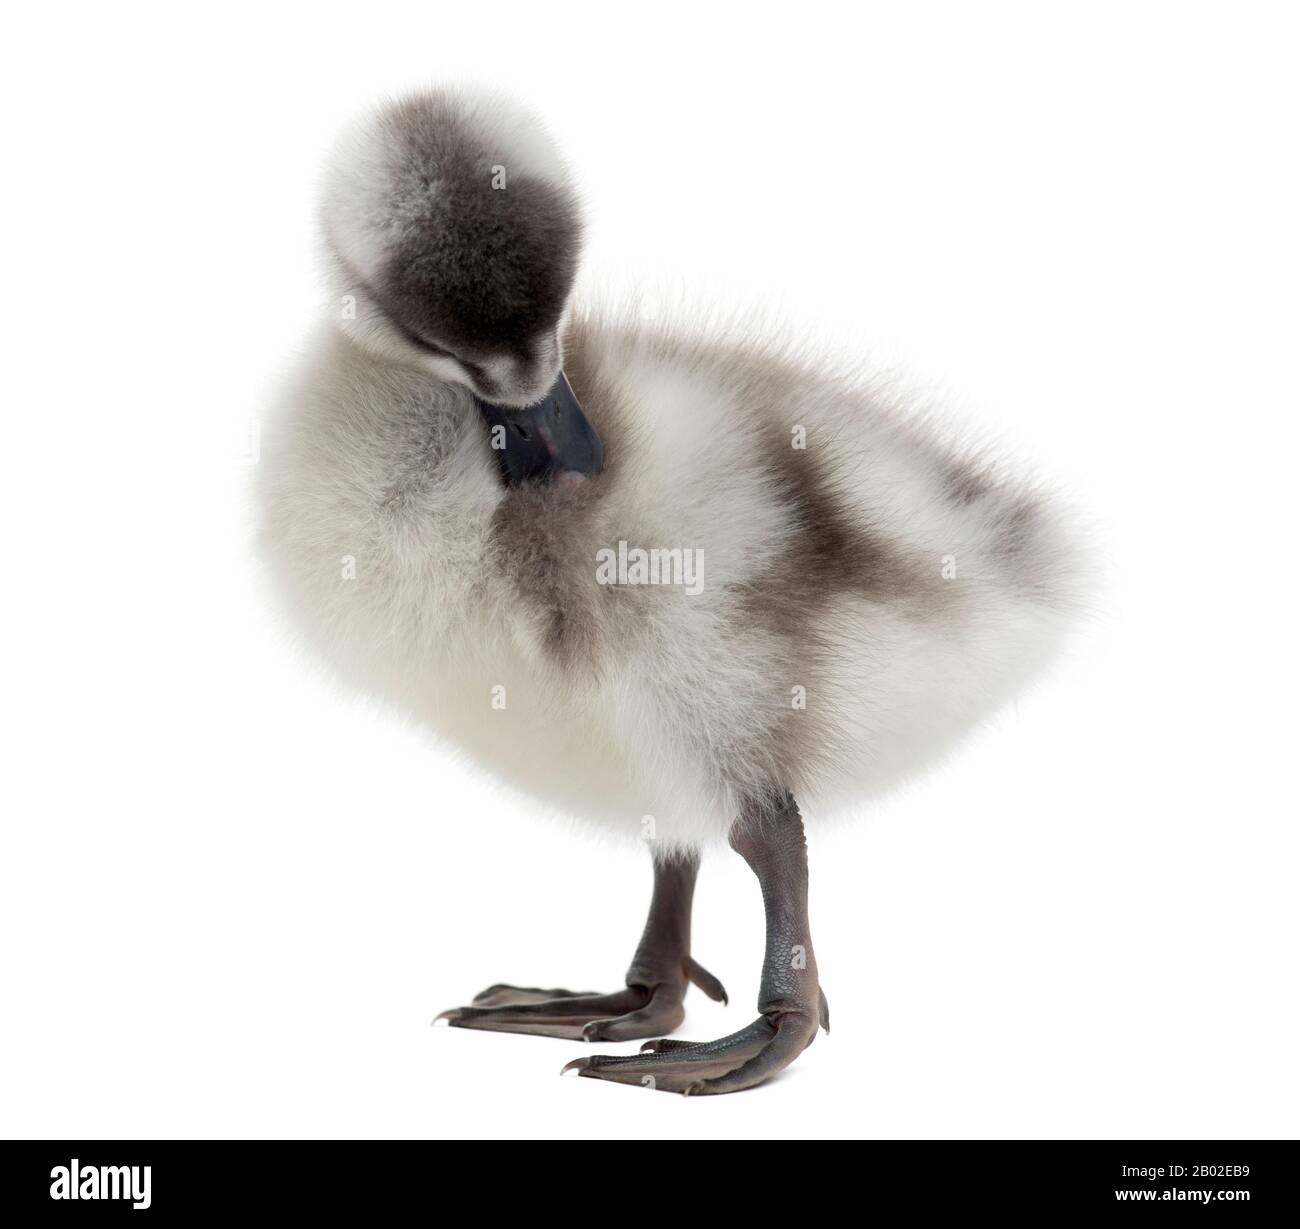 Fulvous Whistling Duck, Dendrocygna bicolor, 6 days old, isolated on white Stock Photo